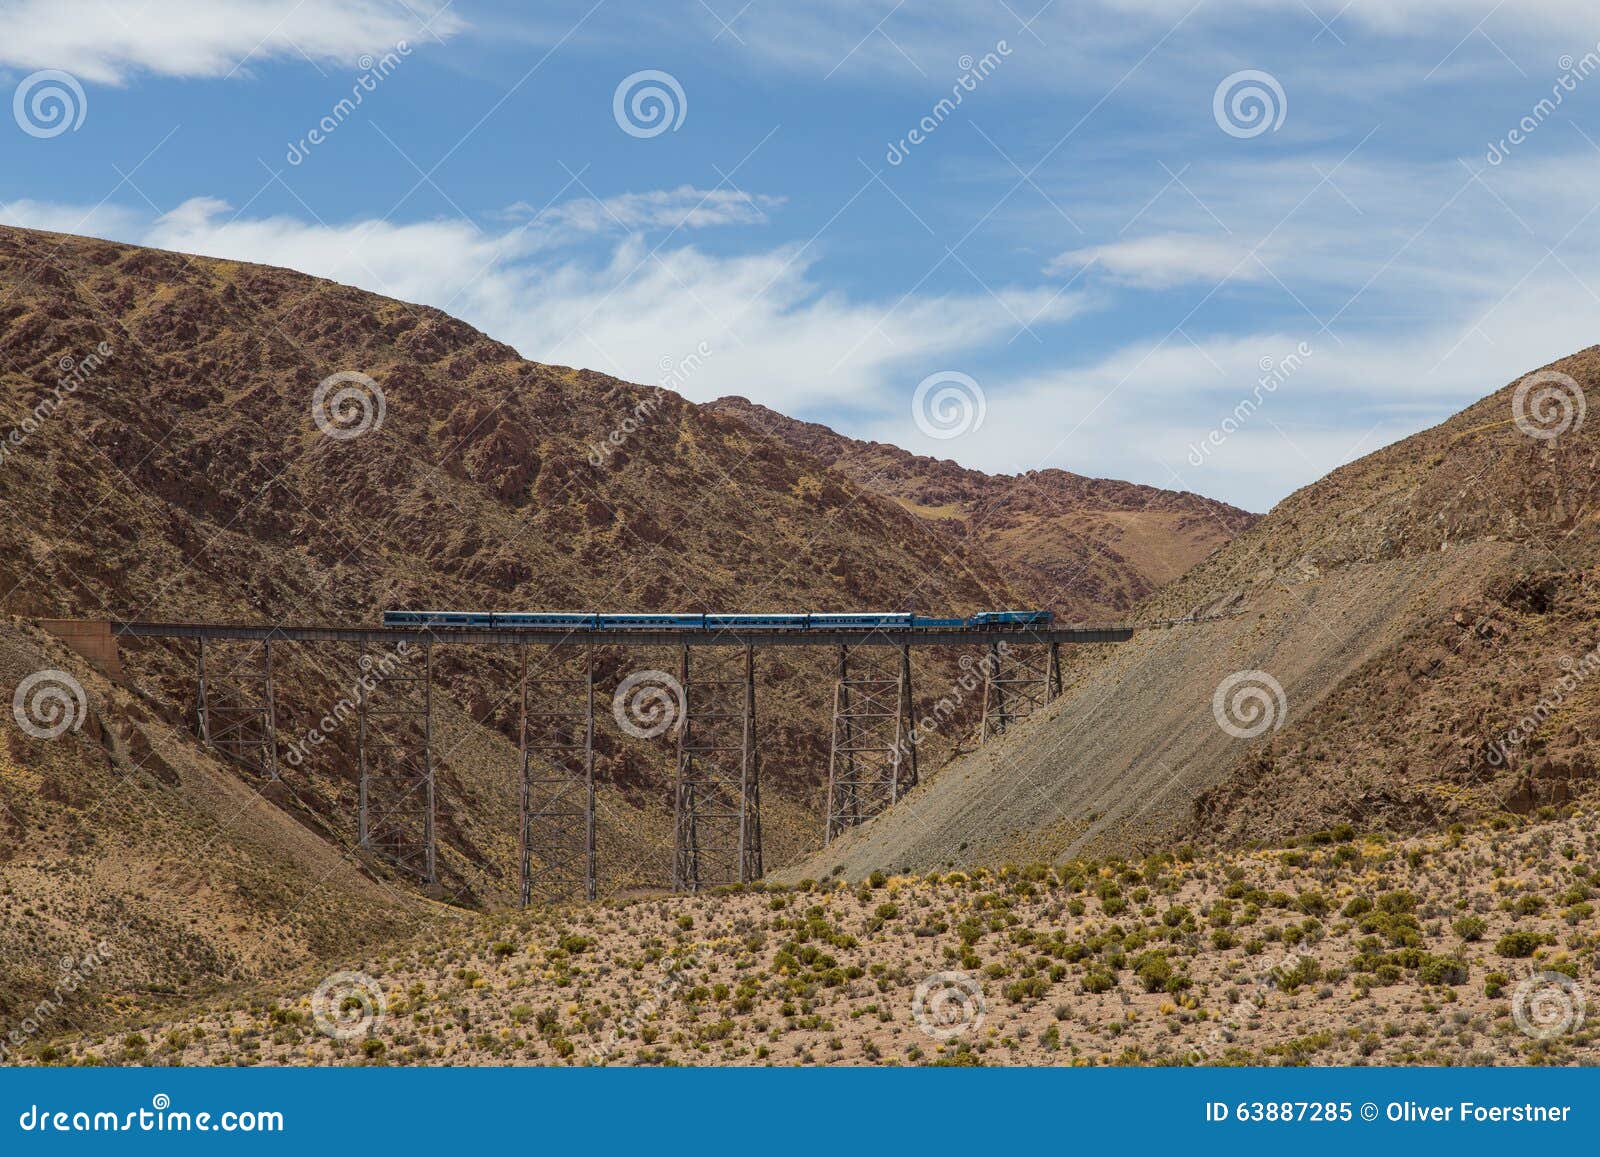 train driving over polvorilla viaduct in argentina